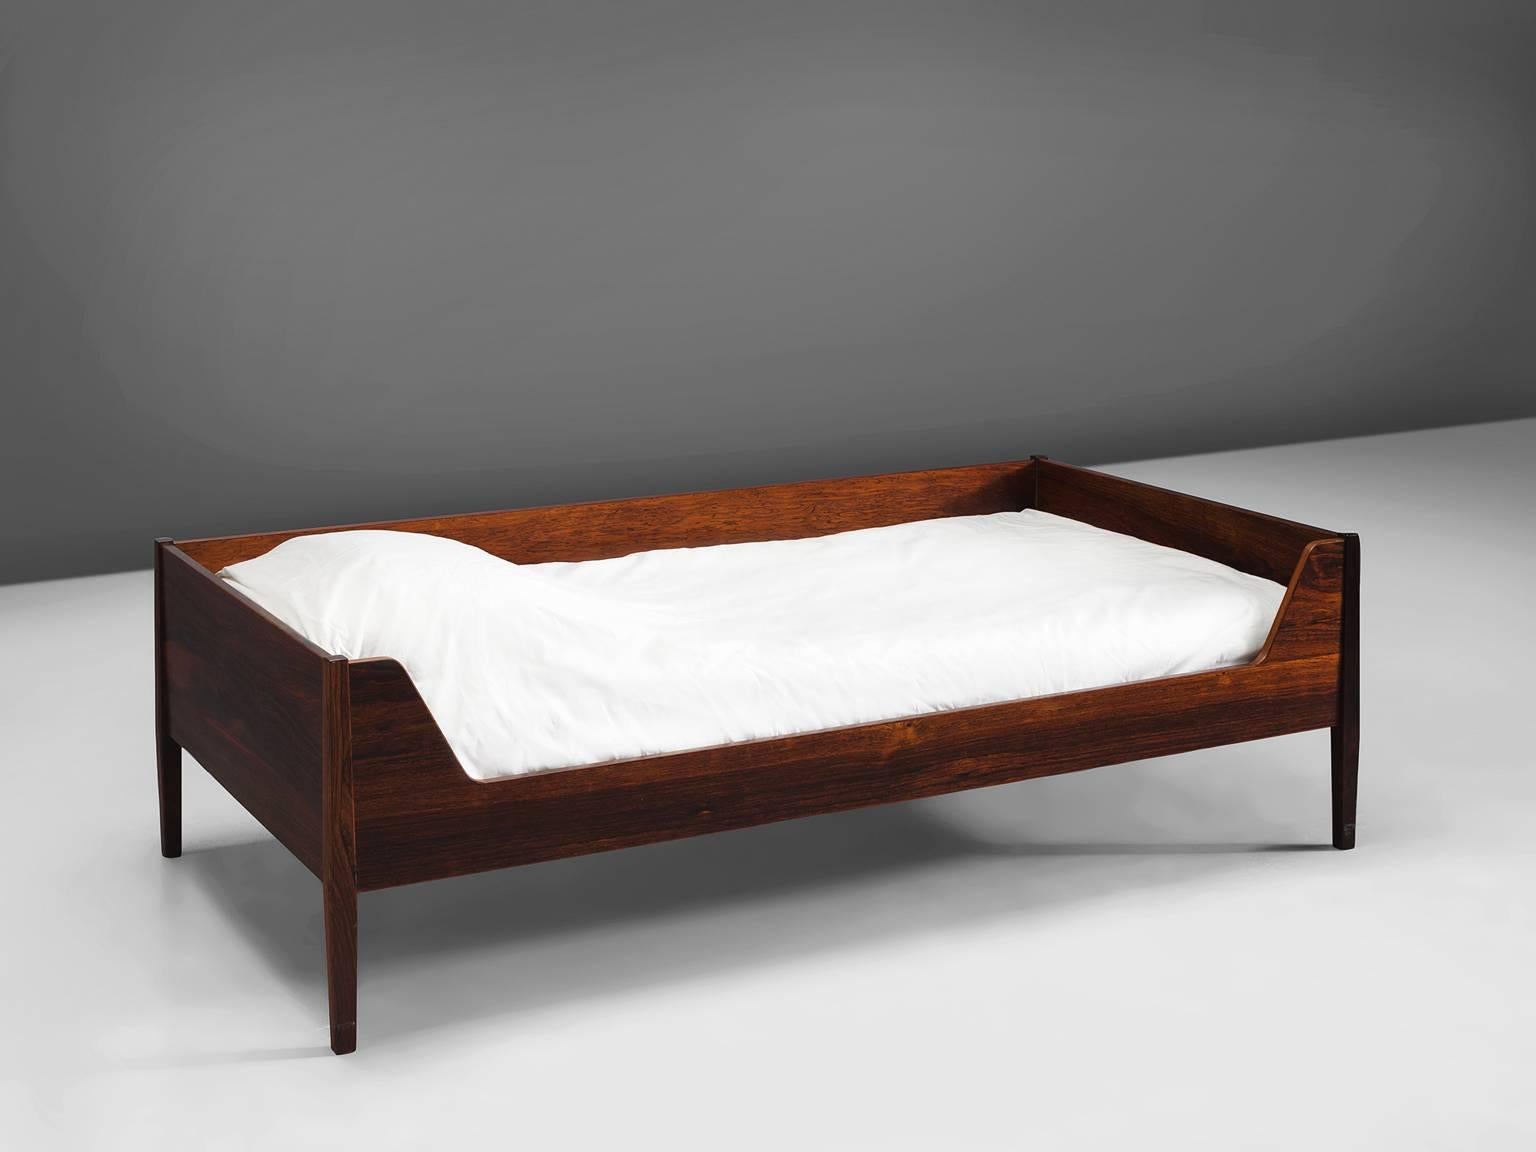 Kaj Winding for Poul Hundevad, bed model PH 22 BJ, rosewood, Denmark, 1960s 

This elegant bed is executed in rosewood and the color and grain is deep and warm. It is the color and richness of the wood that defines this slim and elegant frame. The